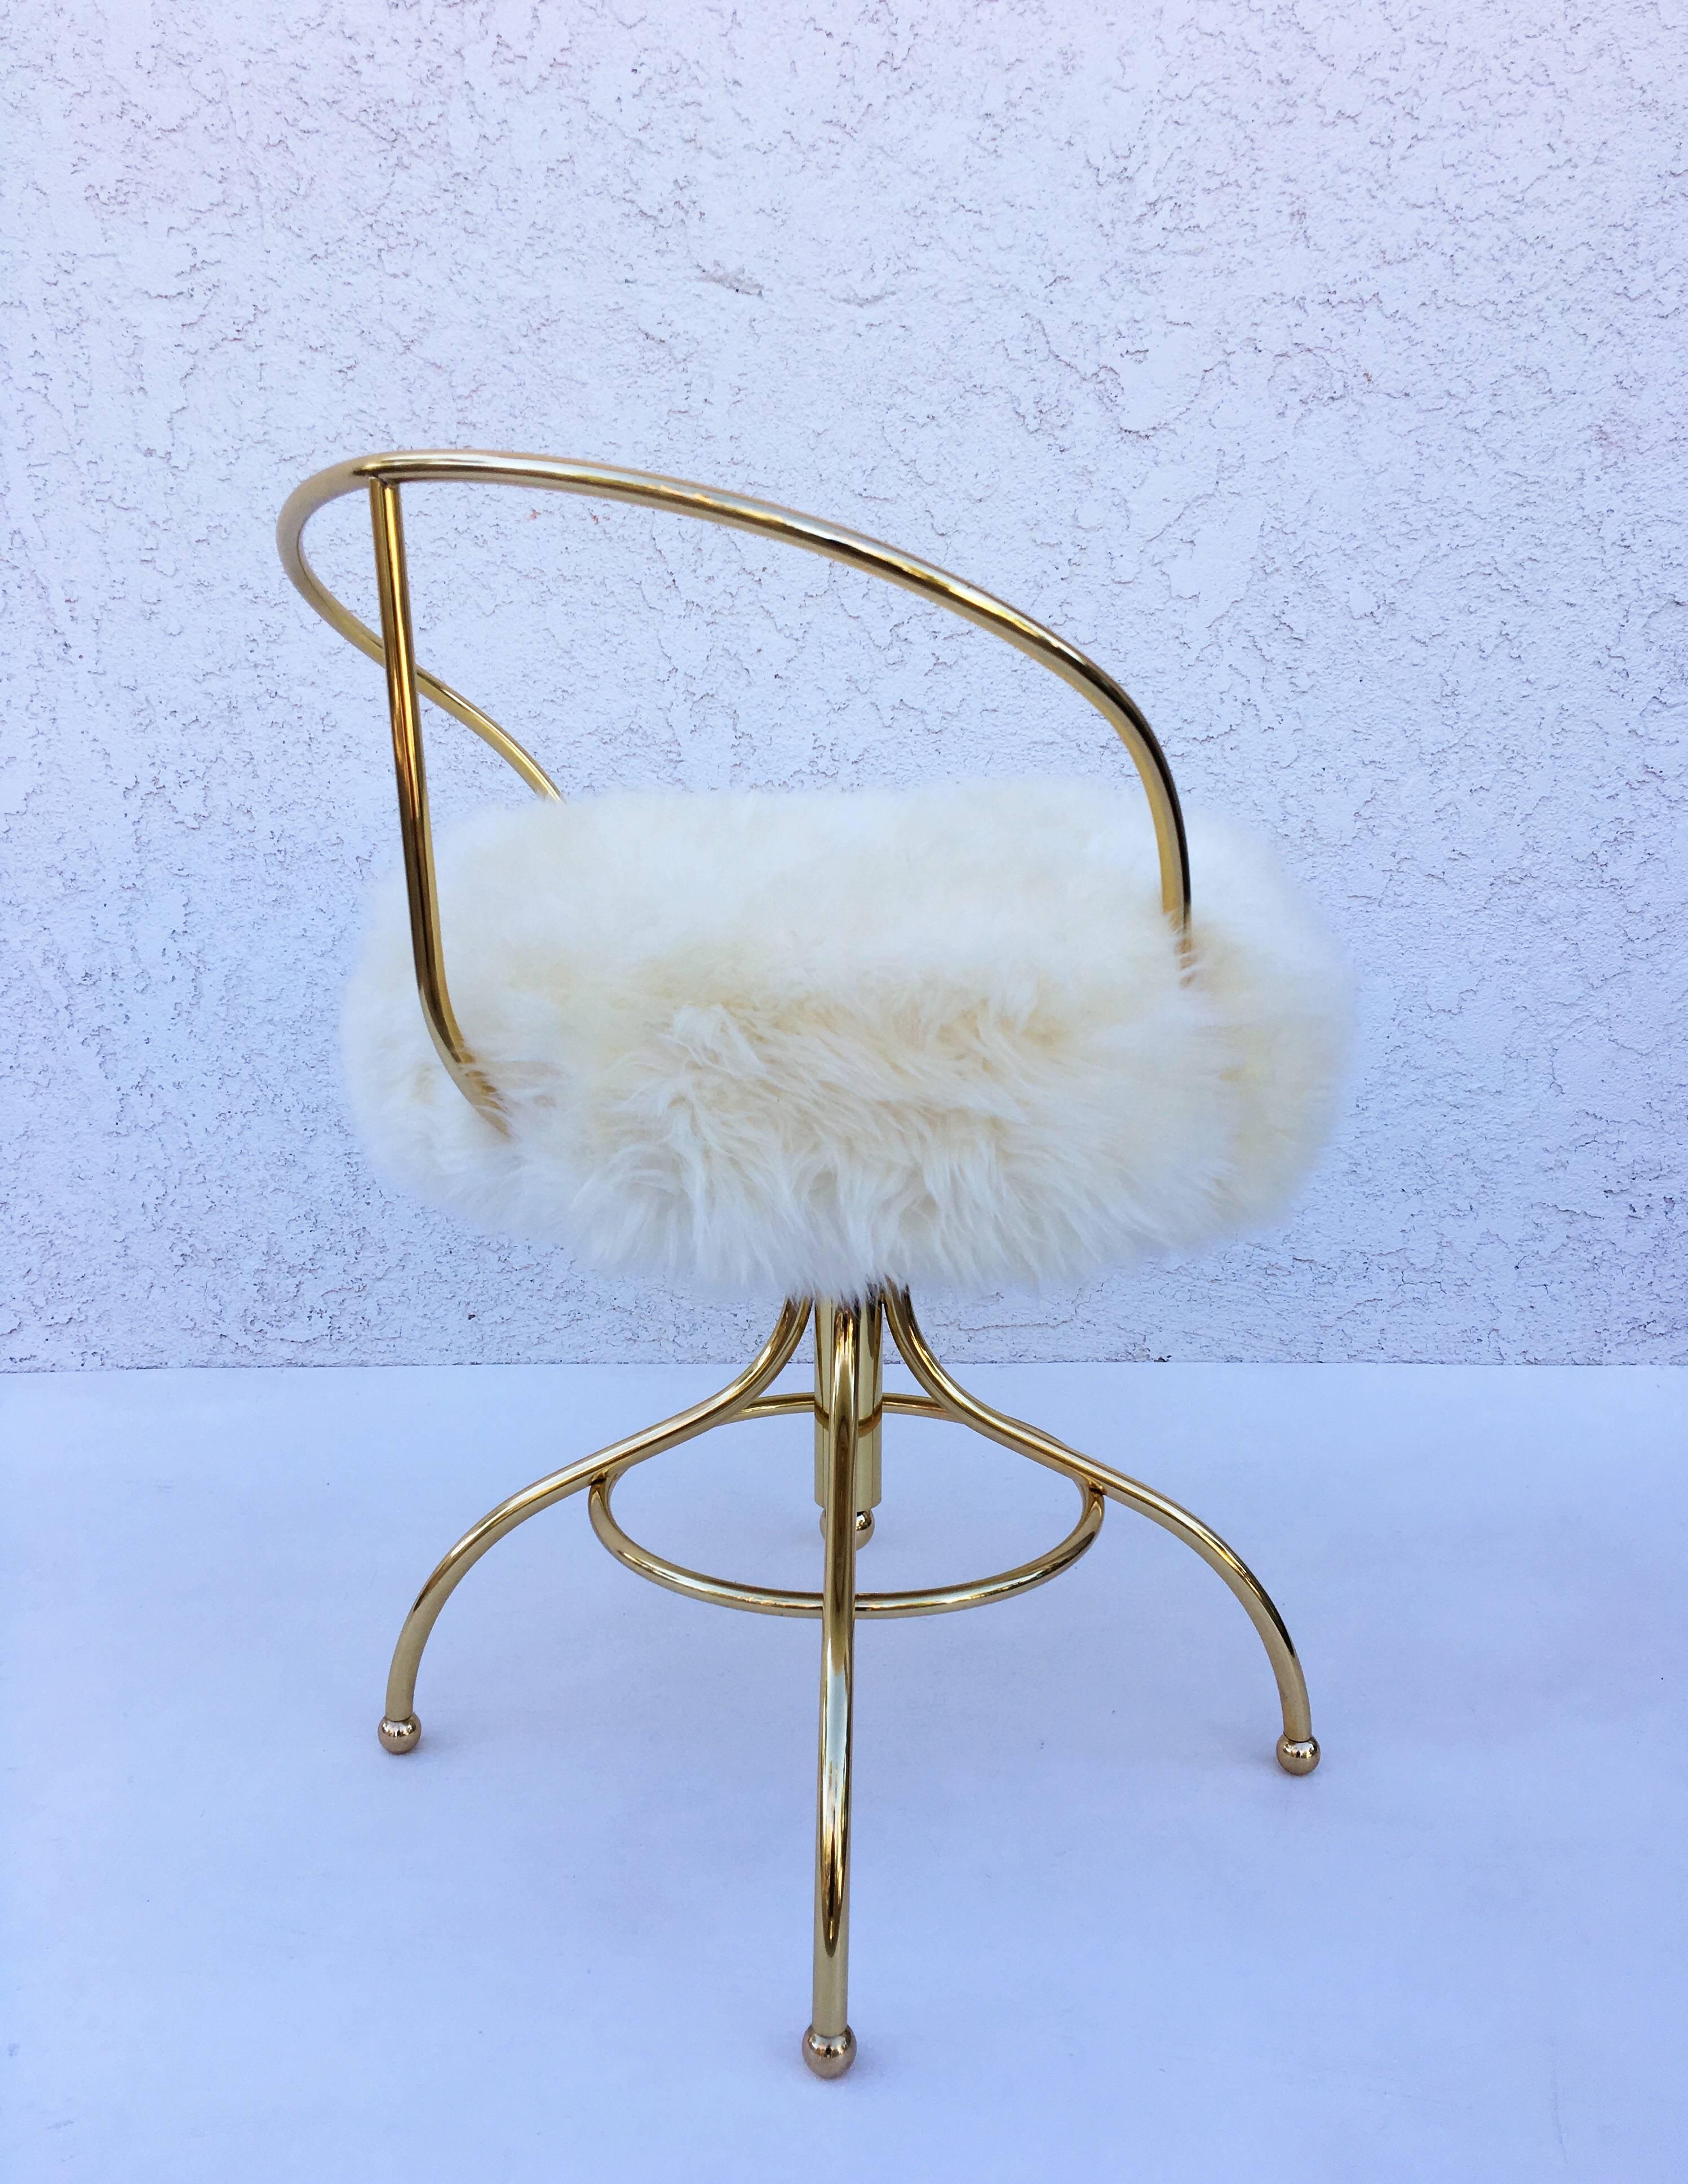 A glamorous polished brass and sheepskin swivel stool from the 